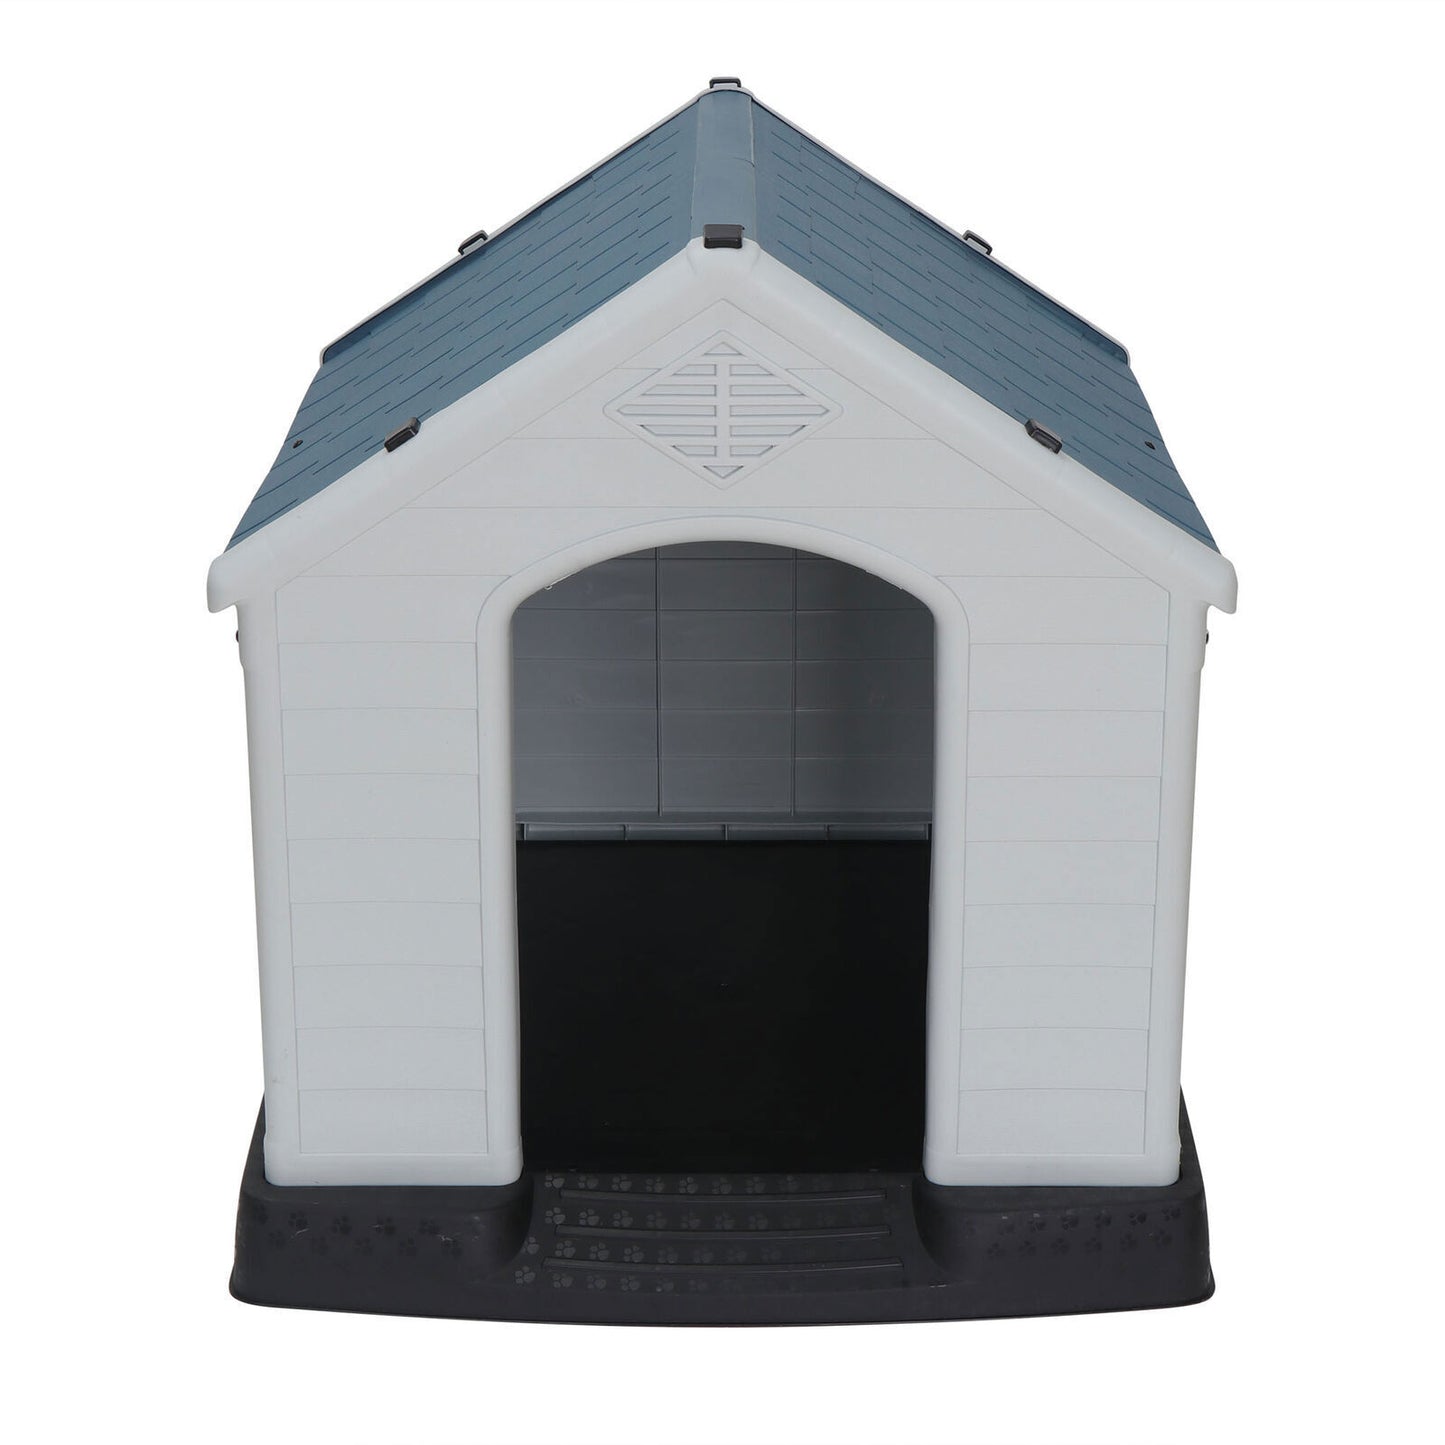 2X Outdoor Dog House Water Resistant Dog House for Small to Medium Sized